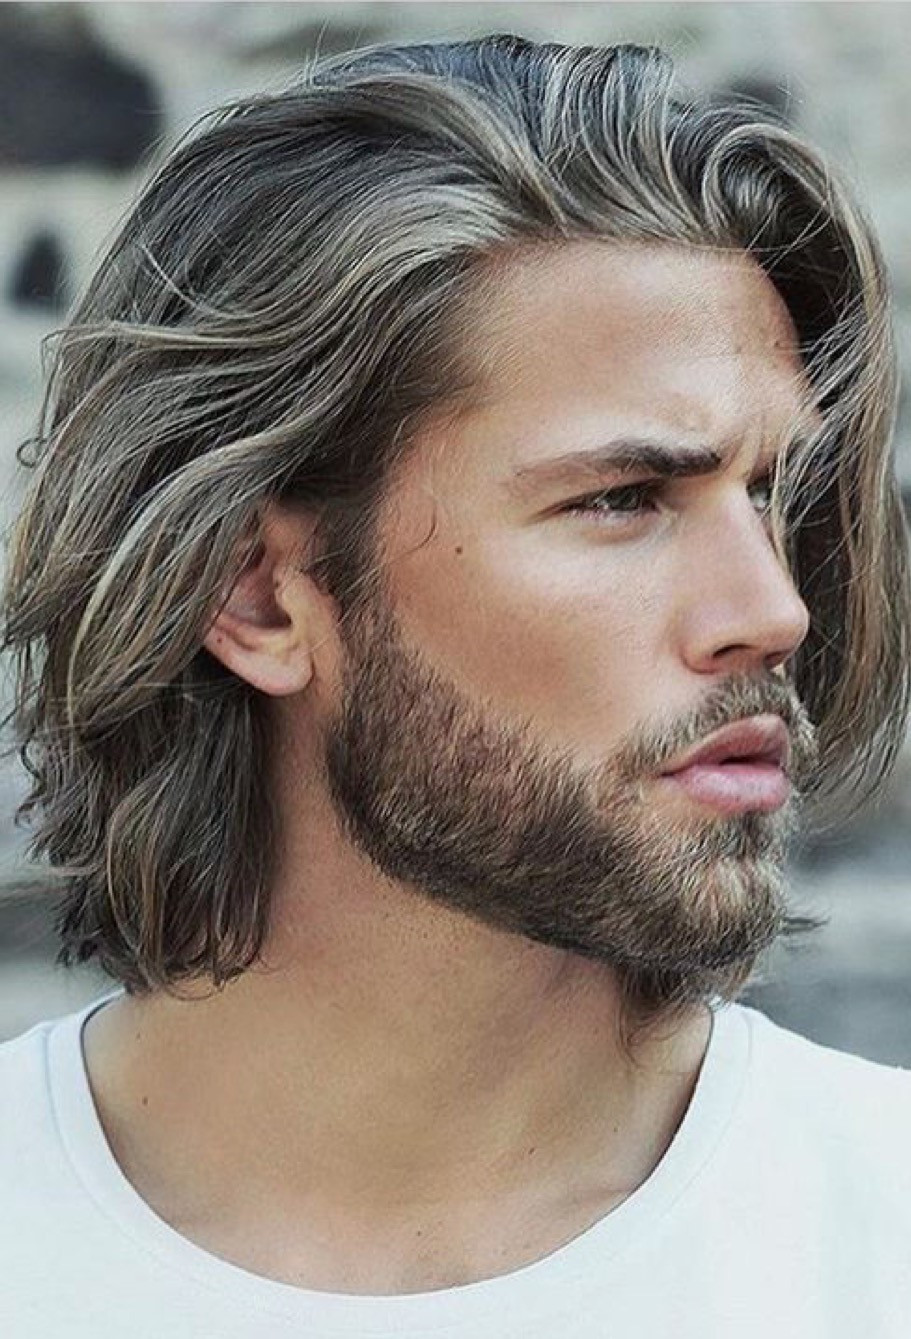 Haircuts For Men With Long Hair
 SAVE THE CLIPPERS FOR THE BEARD MENS HAIR GOES LONGER